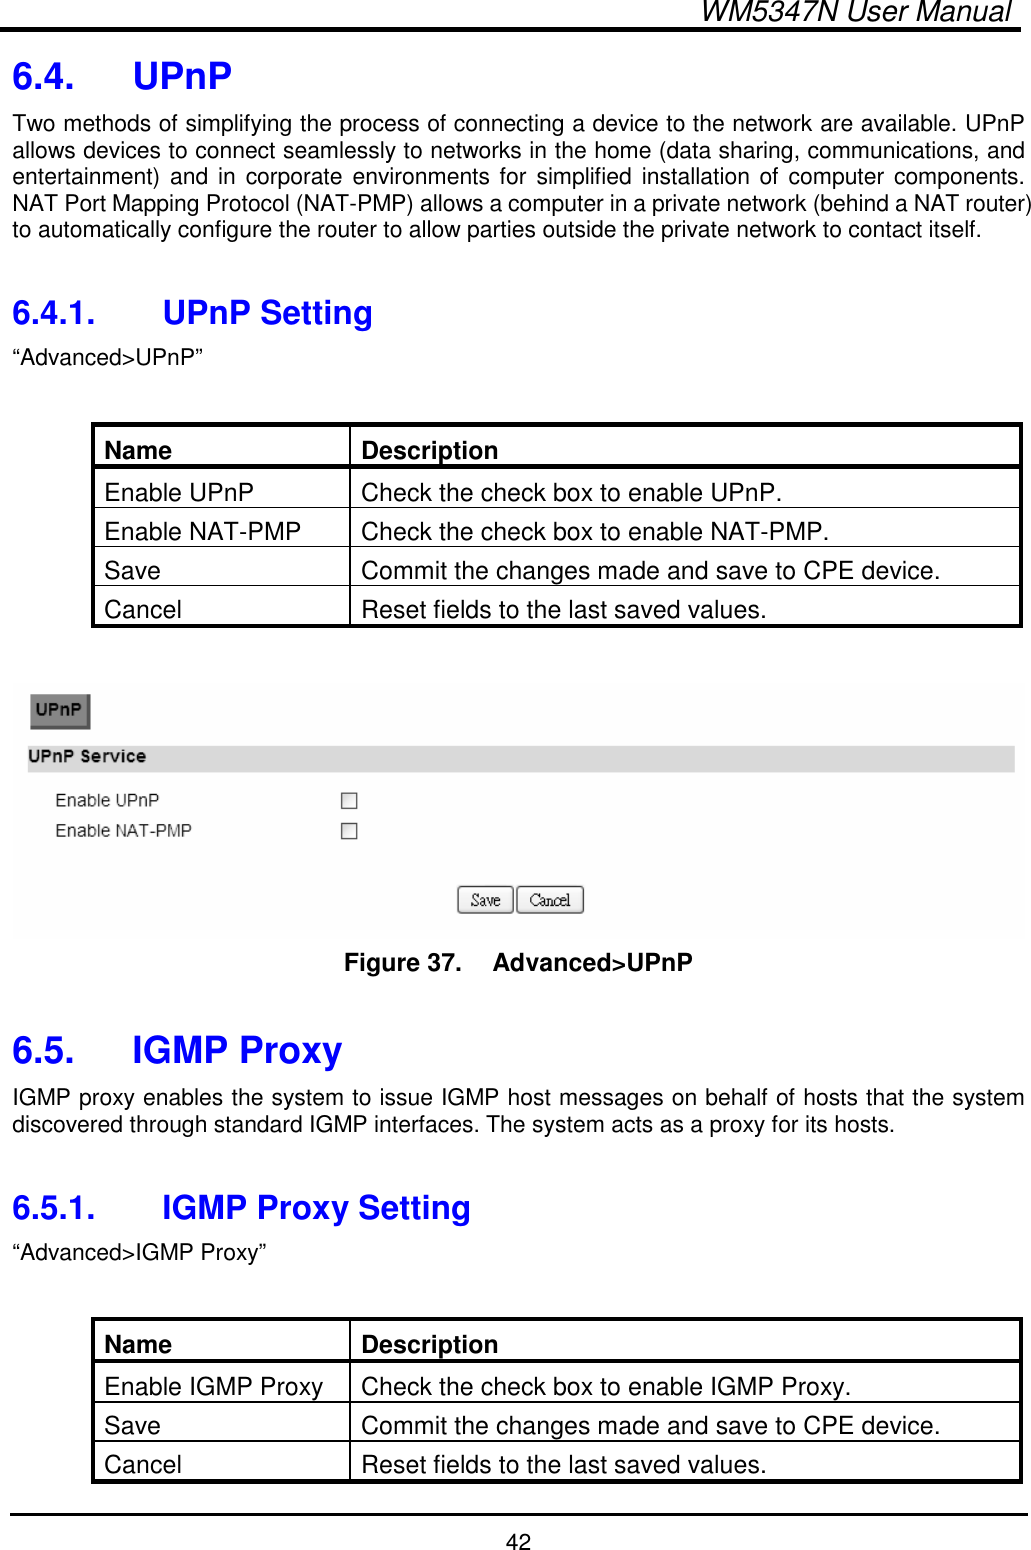  WM5347N User Manual  42 6.4.  UPnP Two methods of simplifying the process of connecting a device to the network are available. UPnP allows devices to connect seamlessly to networks in the home (data sharing, communications, and entertainment) and in corporate environments for  simplified installation of  computer components. NAT Port Mapping Protocol (NAT-PMP) allows a computer in a private network (behind a NAT router) to automatically configure the router to allow parties outside the private network to contact itself.  6.4.1.  UPnP Setting “Advanced&gt;UPnP”  Name  Description Enable UPnP  Check the check box to enable UPnP. Enable NAT-PMP  Check the check box to enable NAT-PMP. Save  Commit the changes made and save to CPE device. Cancel  Reset fields to the last saved values.   Figure 37.   Advanced&gt;UPnP  6.5.  IGMP Proxy IGMP proxy enables the system to issue IGMP host messages on behalf of hosts that the system discovered through standard IGMP interfaces. The system acts as a proxy for its hosts.  6.5.1.  IGMP Proxy Setting “Advanced&gt;IGMP Proxy”  Name  Description Enable IGMP Proxy  Check the check box to enable IGMP Proxy. Save  Commit the changes made and save to CPE device. Cancel  Reset fields to the last saved values. 